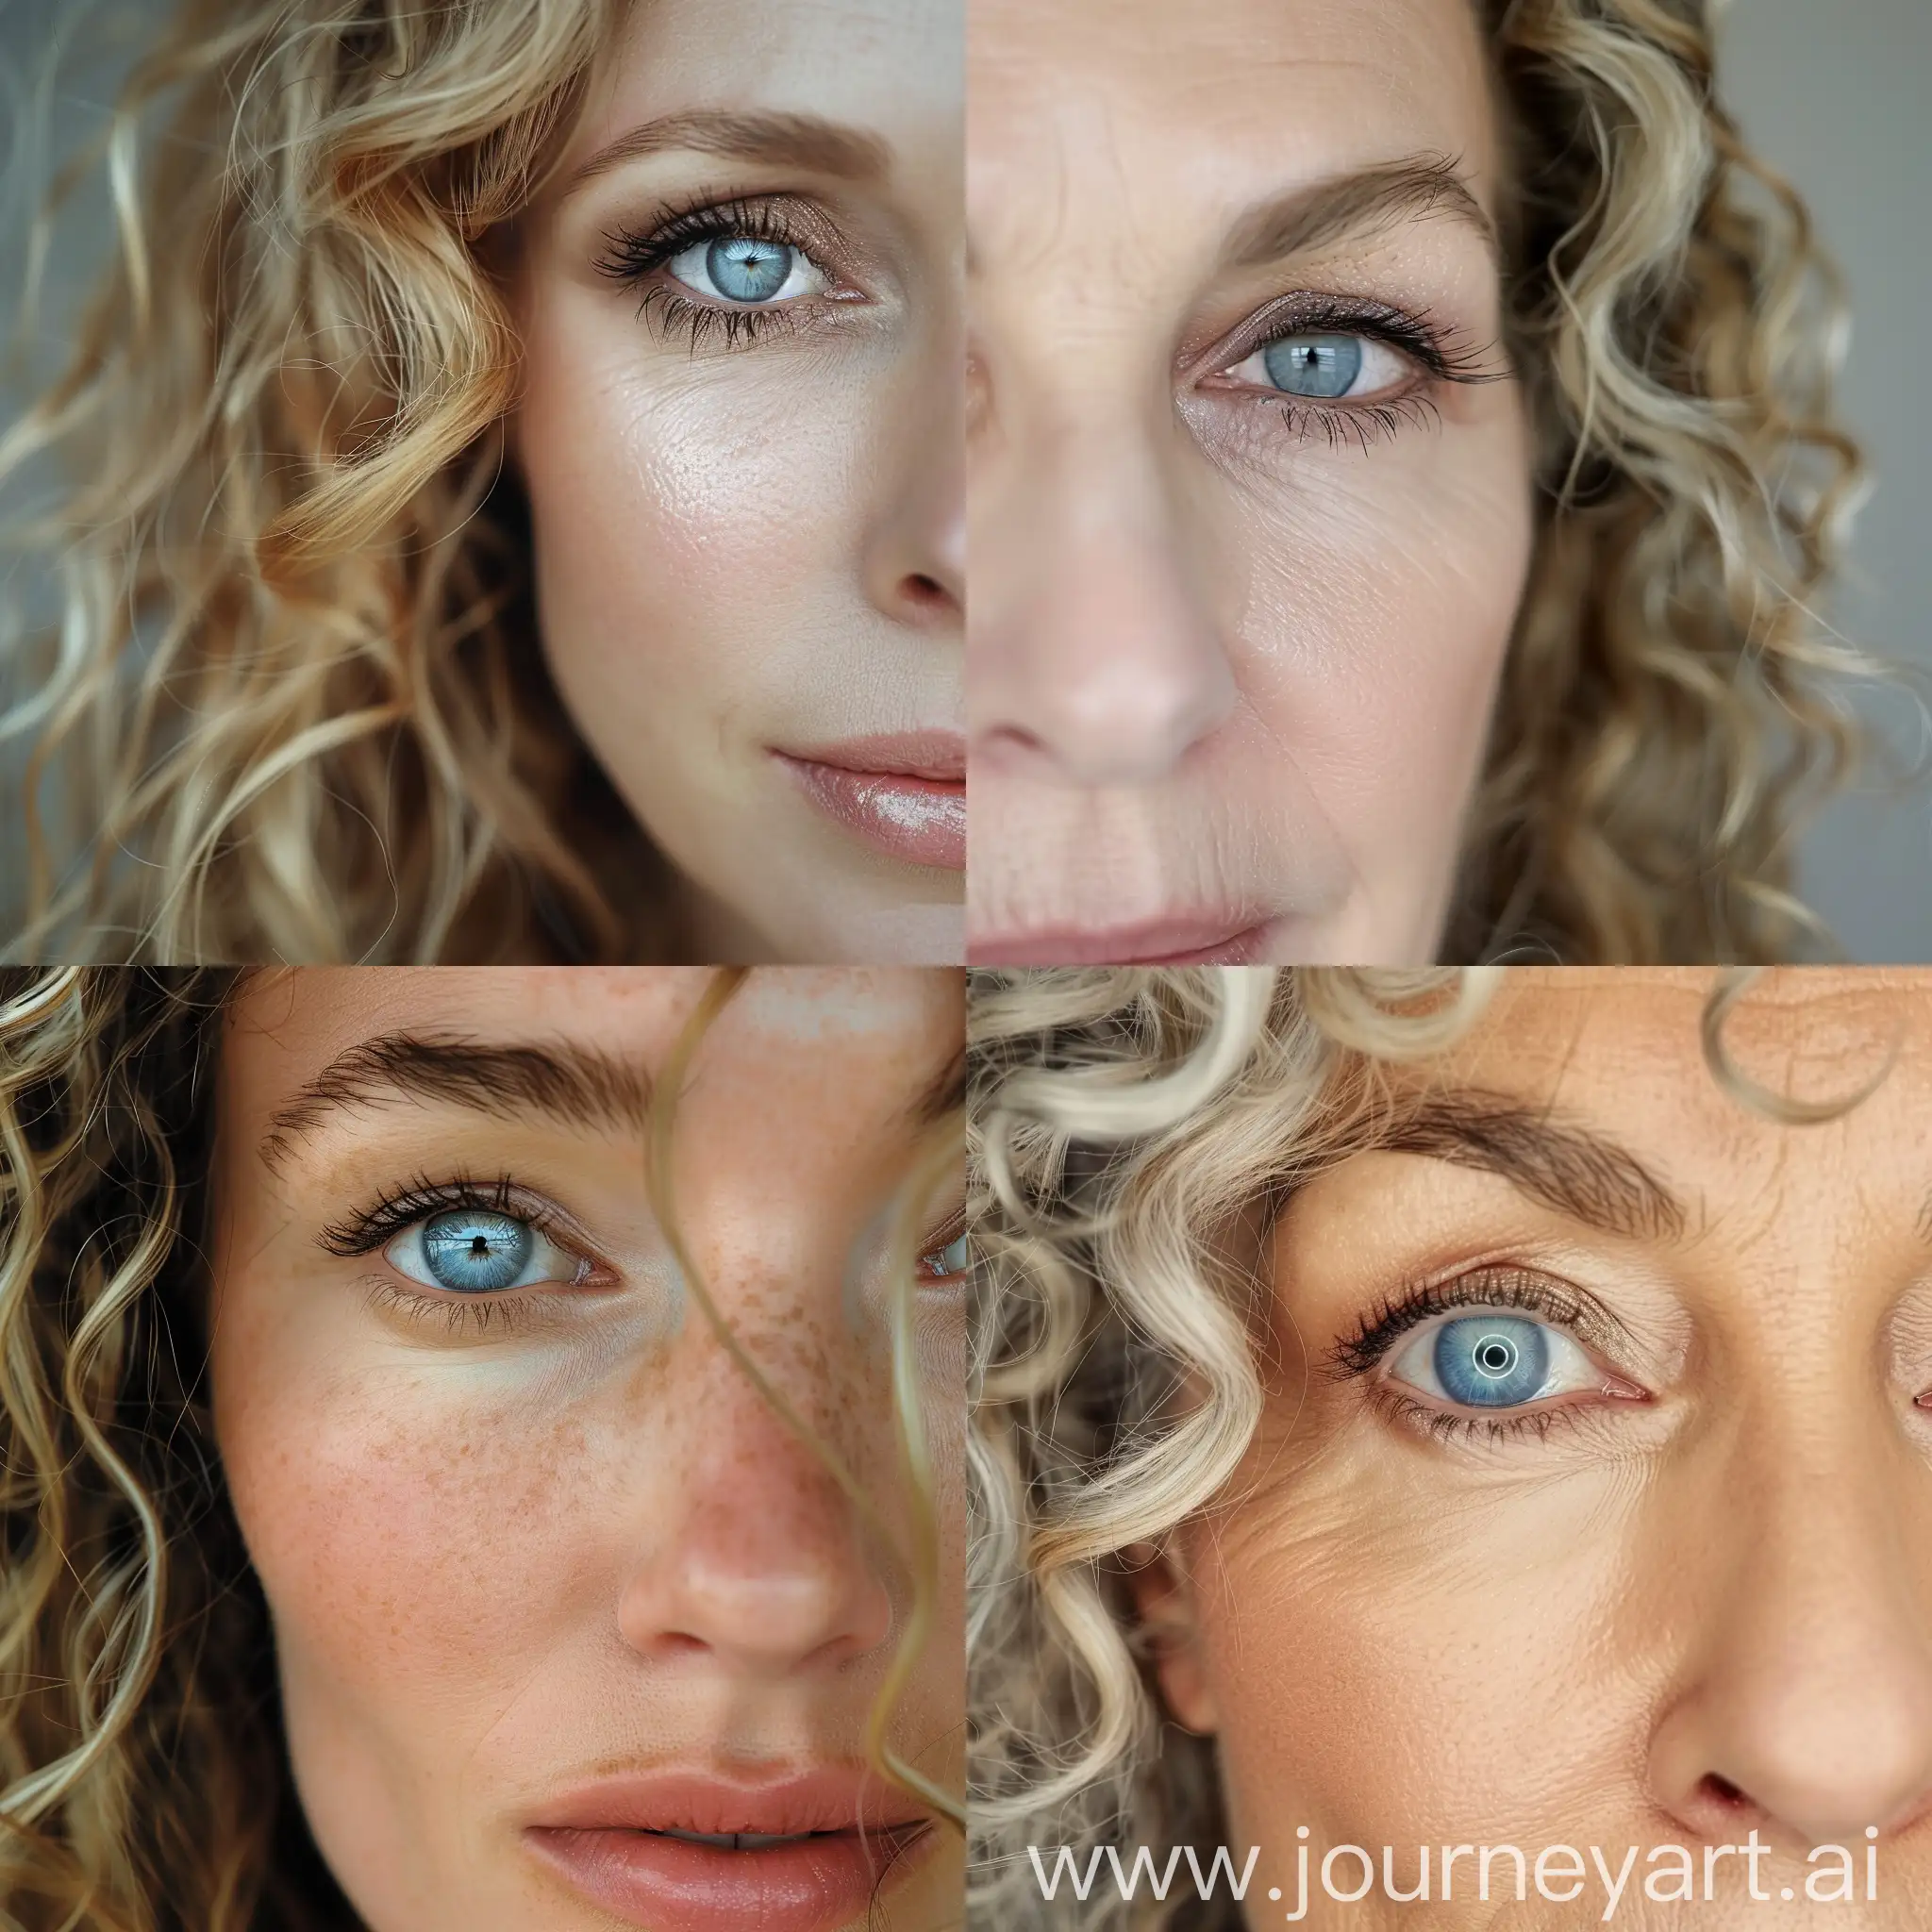 Ideal eye make-up for 45 years old woman, with blue eyes, blond and curly long hair, fair skin
